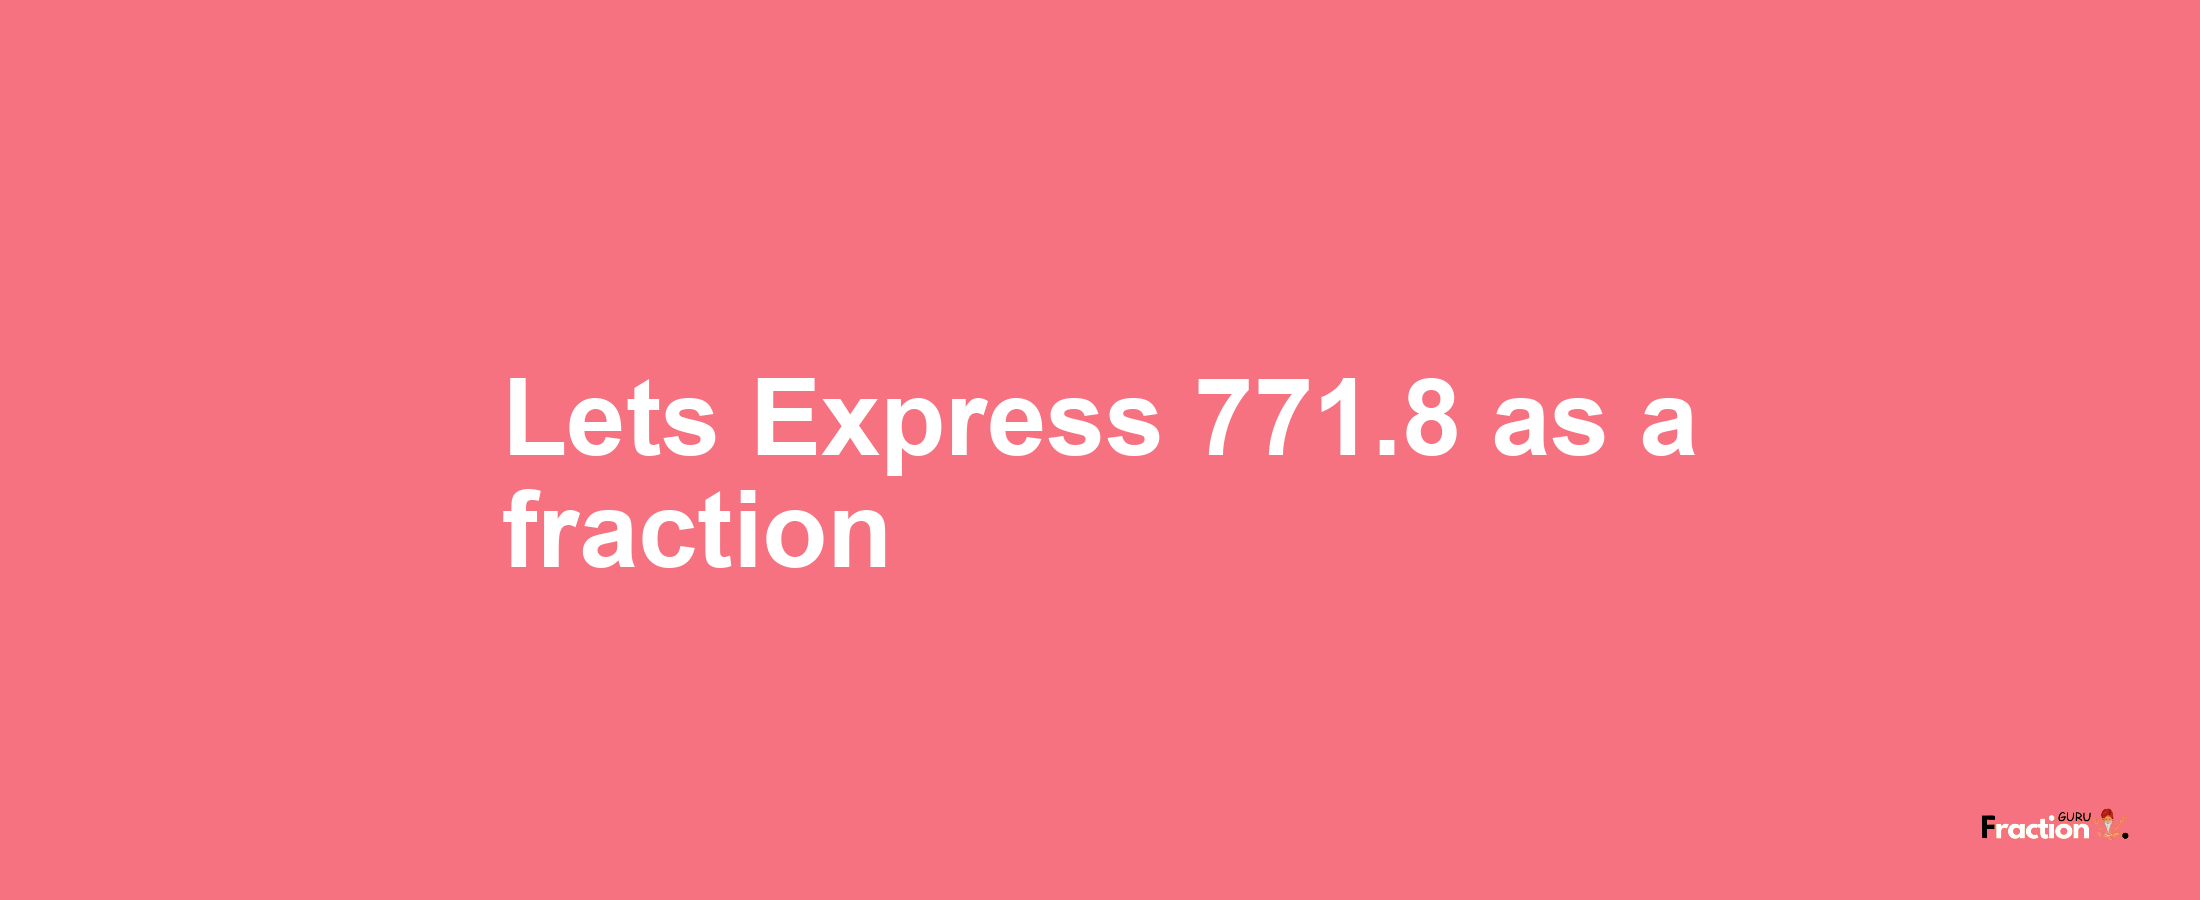 Lets Express 771.8 as afraction